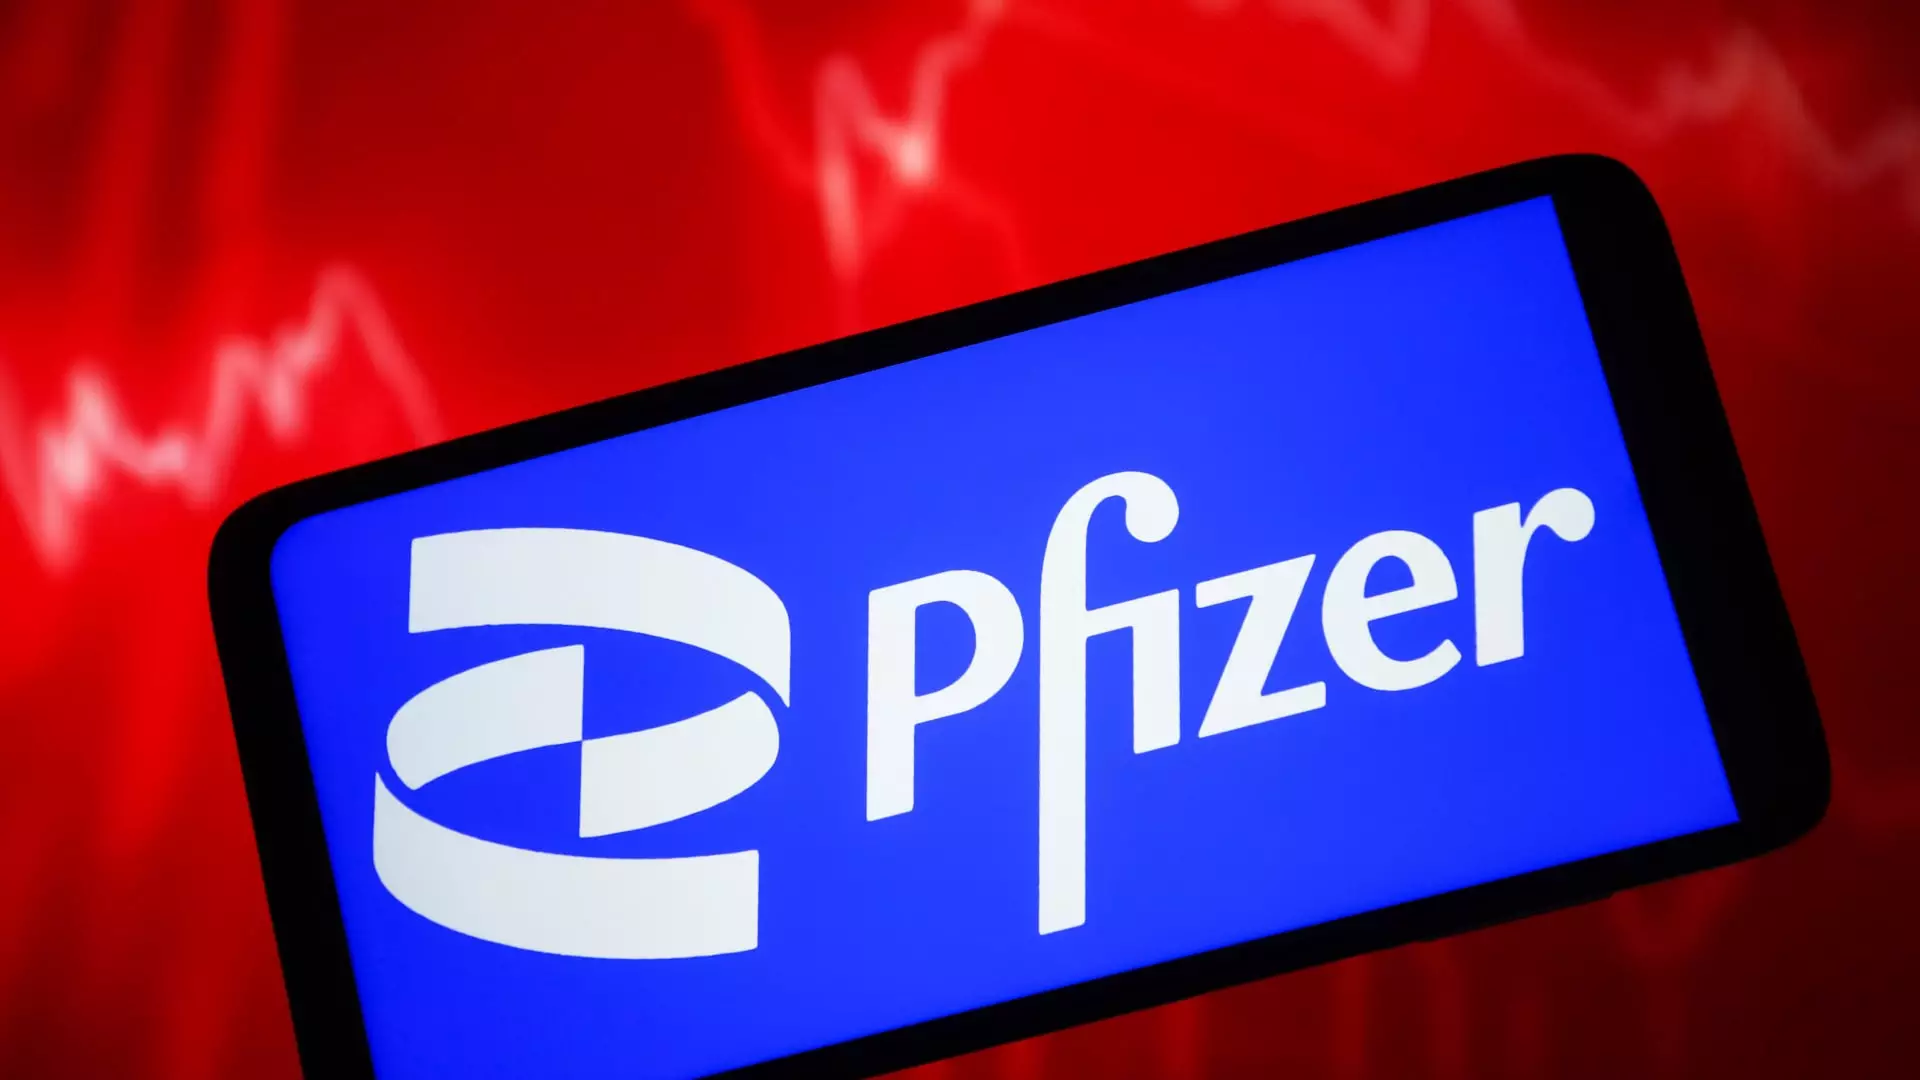 The FDA Approves Pfizer’s Gene Therapy for Hemophilia B: A Game Changer in Rare Genetic Disorders